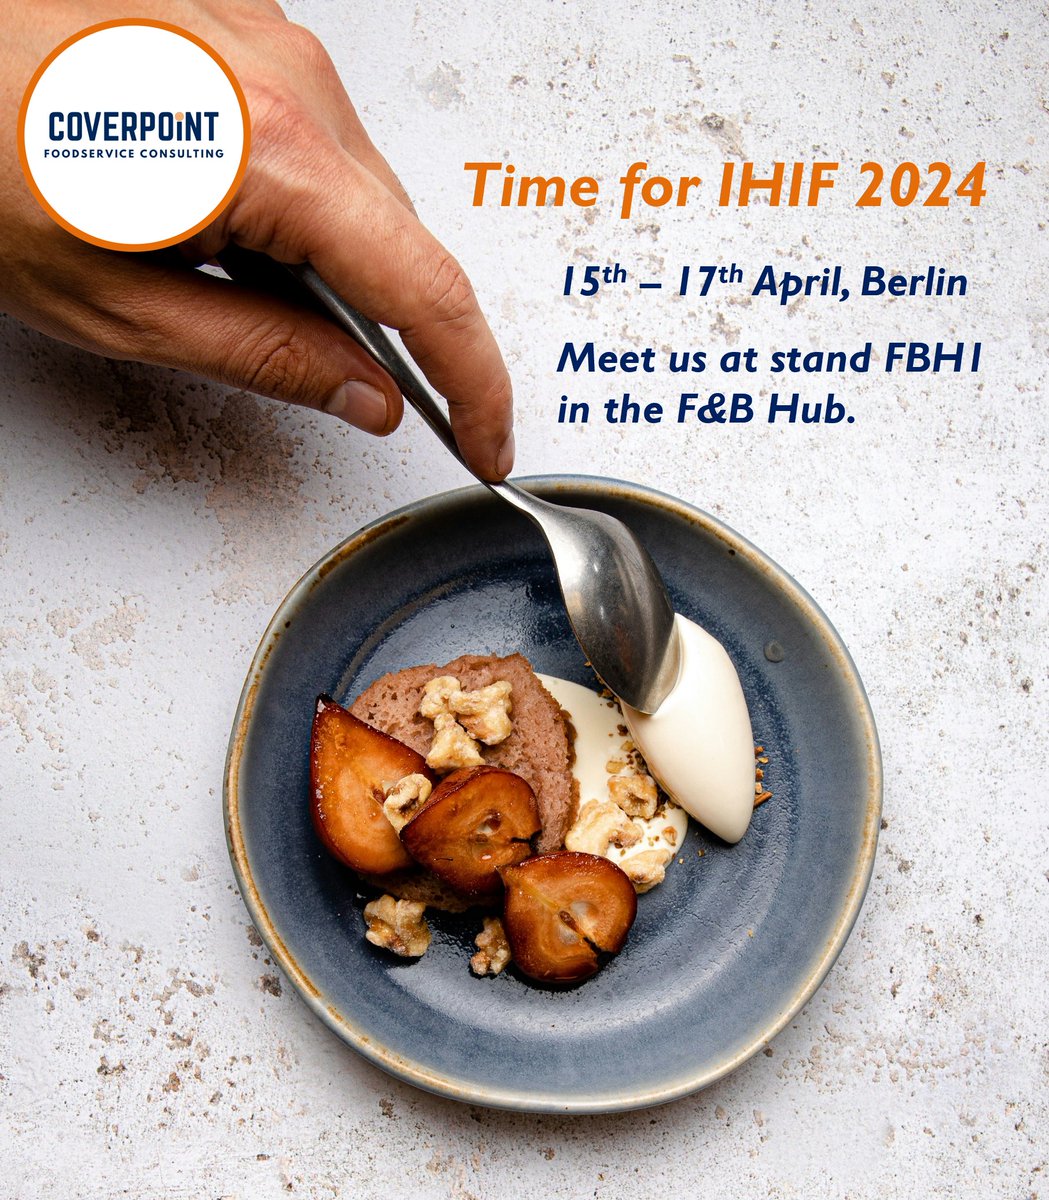 Looking forward to the International Hospitality Investment Forum (IHIF). Our Directors Paulina Herrmann and Richard Moulds will be around to talk F&B strategy, trends & innovation - stop by and say hello.

#hoteldevelopment #ihifemea24 #network #hospitality #foodservice #trends